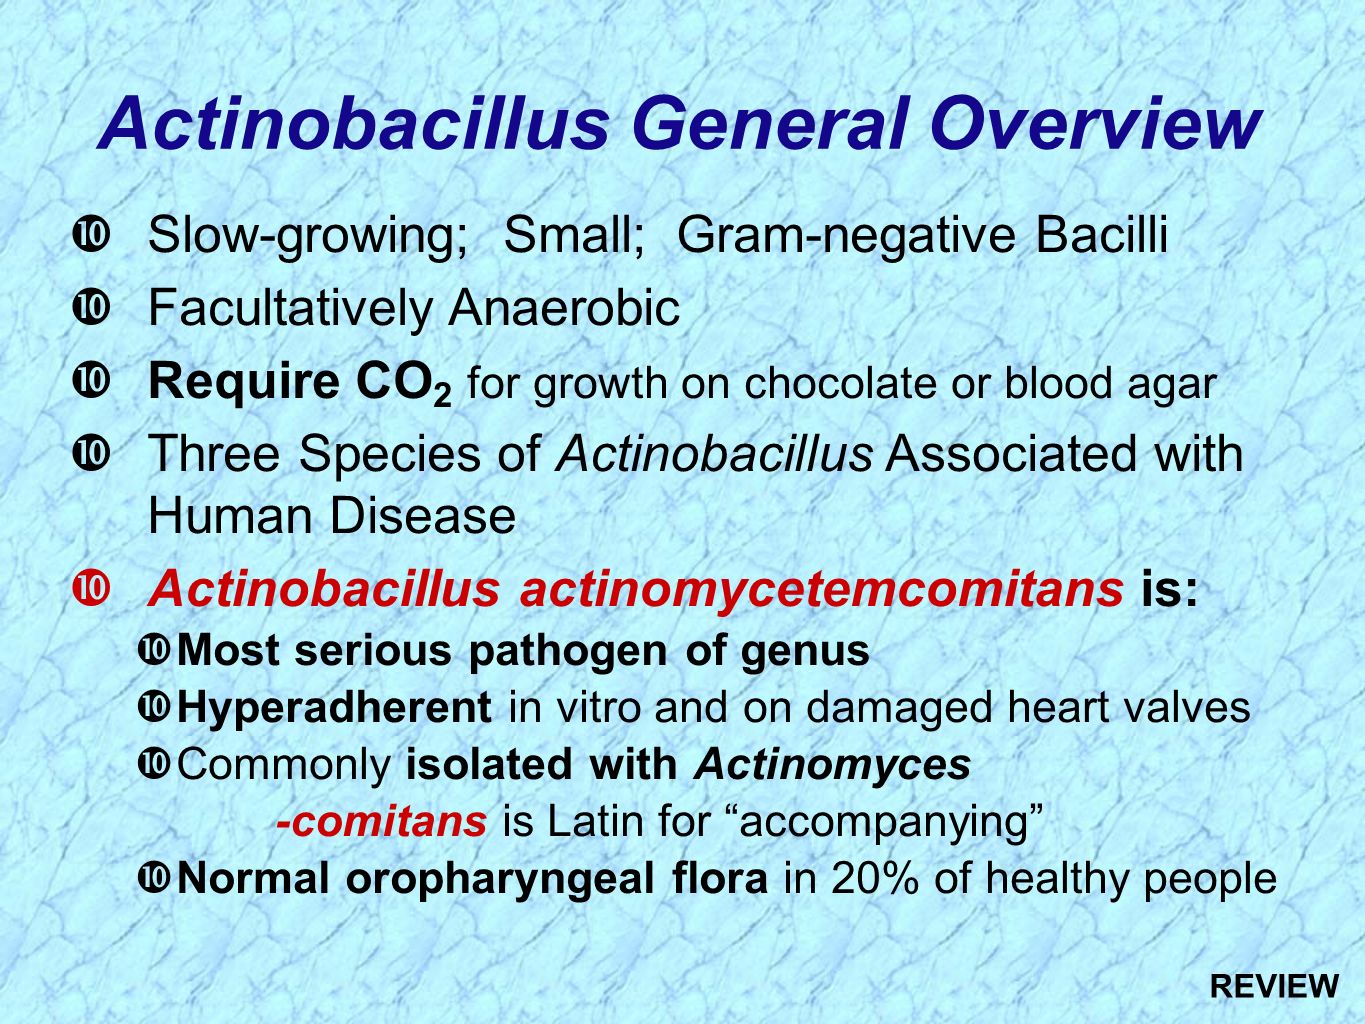 Actinobacillus General Overview  Slow-growing; Small; Gram-negative Bacilli  Facultatively Anaerobic  Require CO 2 for growth on chocolate or blood agar  Three Species of Actinobacillus Associated with Human Disease  Actinobacillus actinomycetemcomitans is:  Most serious pathogen of genus  Hyperadherent in vitro and on damaged heart valves  Commonly isolated with Actinomyces -comitans is Latin for accompanying  Normal oropharyngeal flora in 20% of healthy people REVIEW